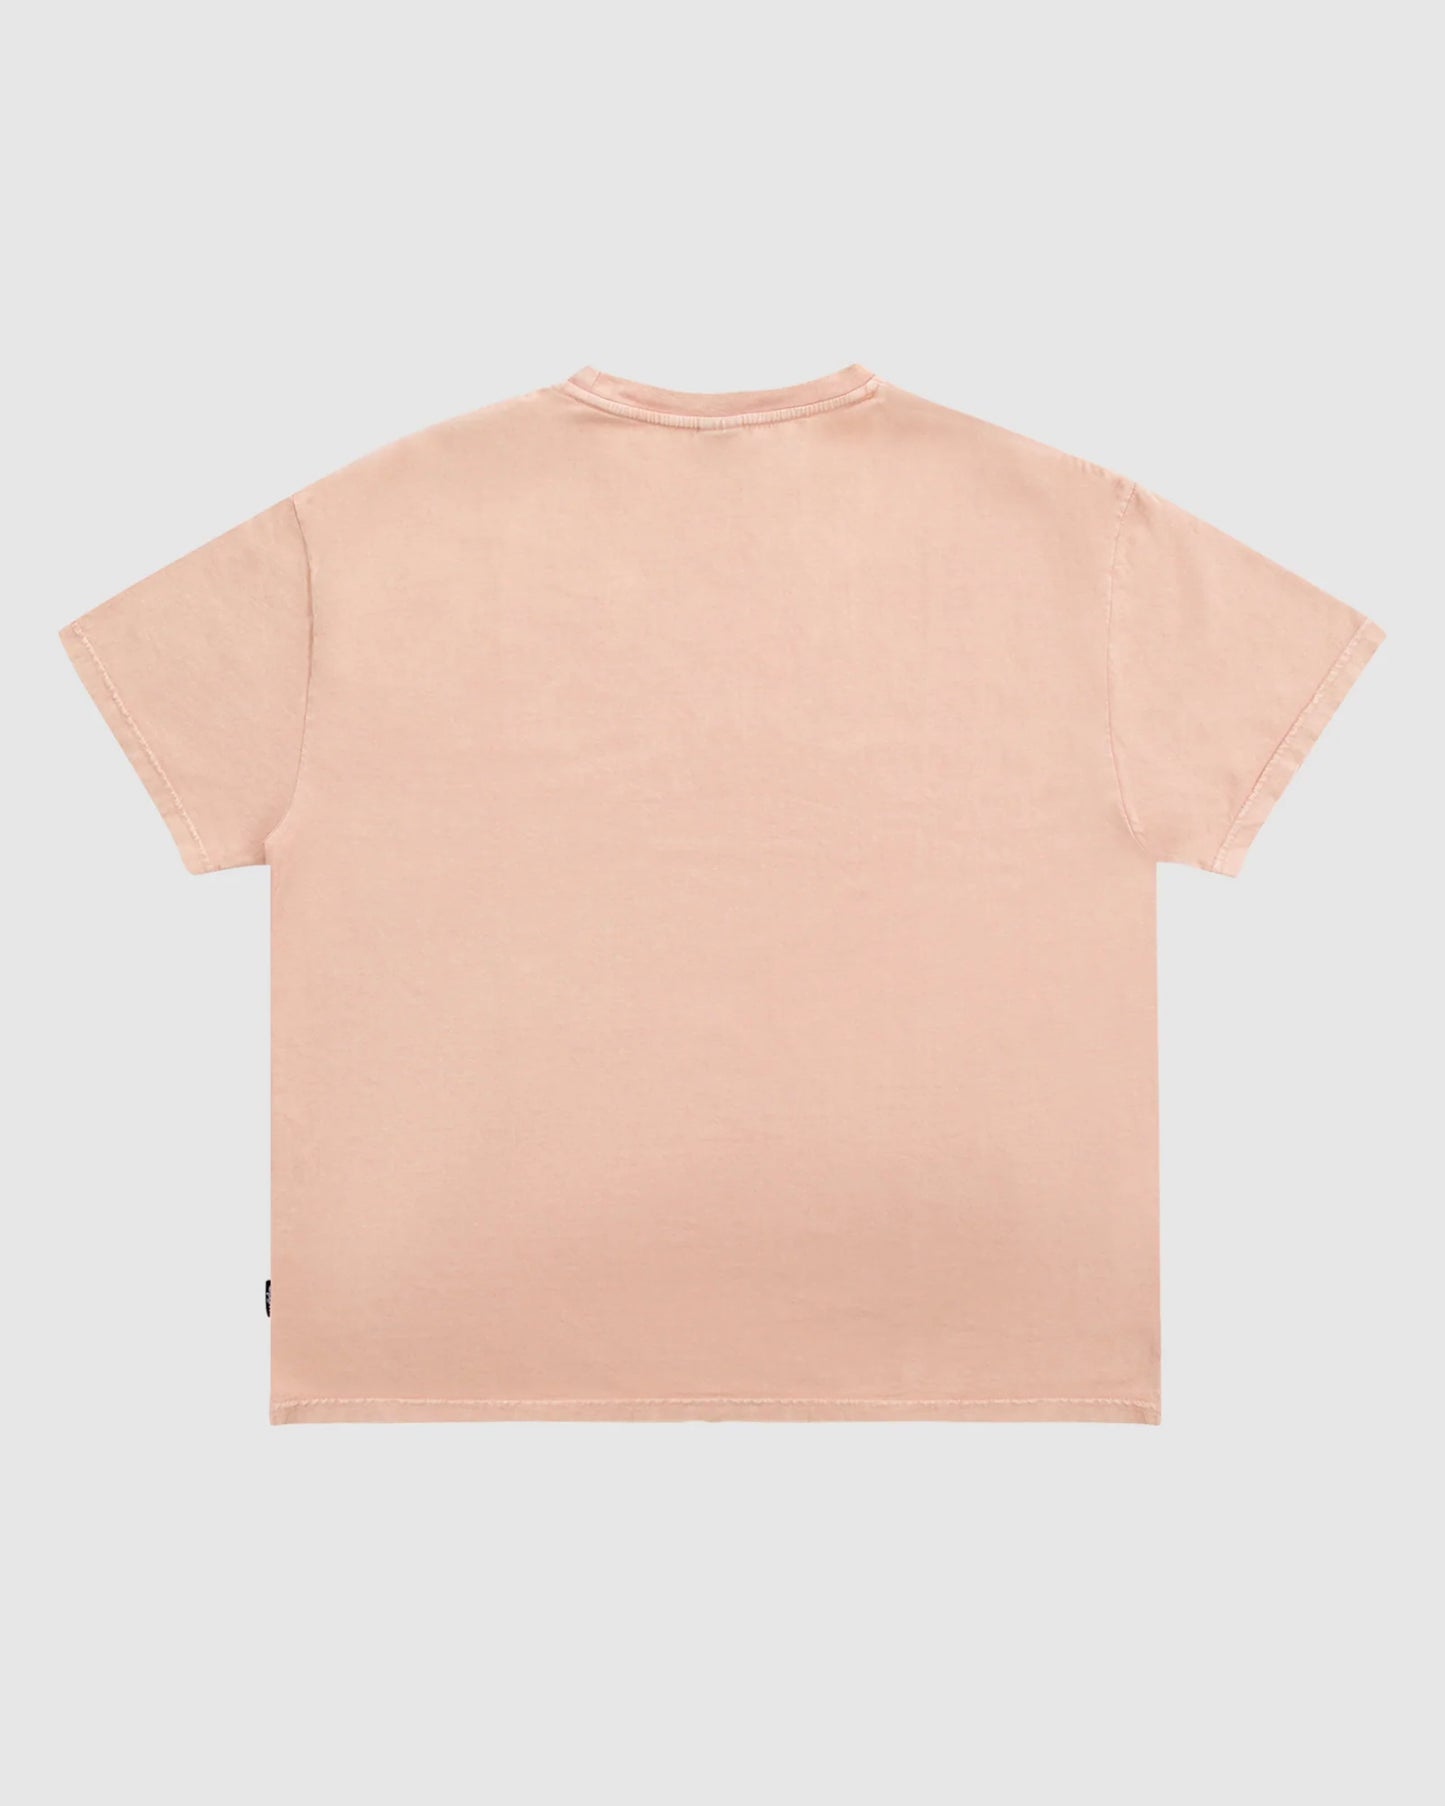 WNDRR Hoxton Vintage Fit Mens Tee - Washed Peach